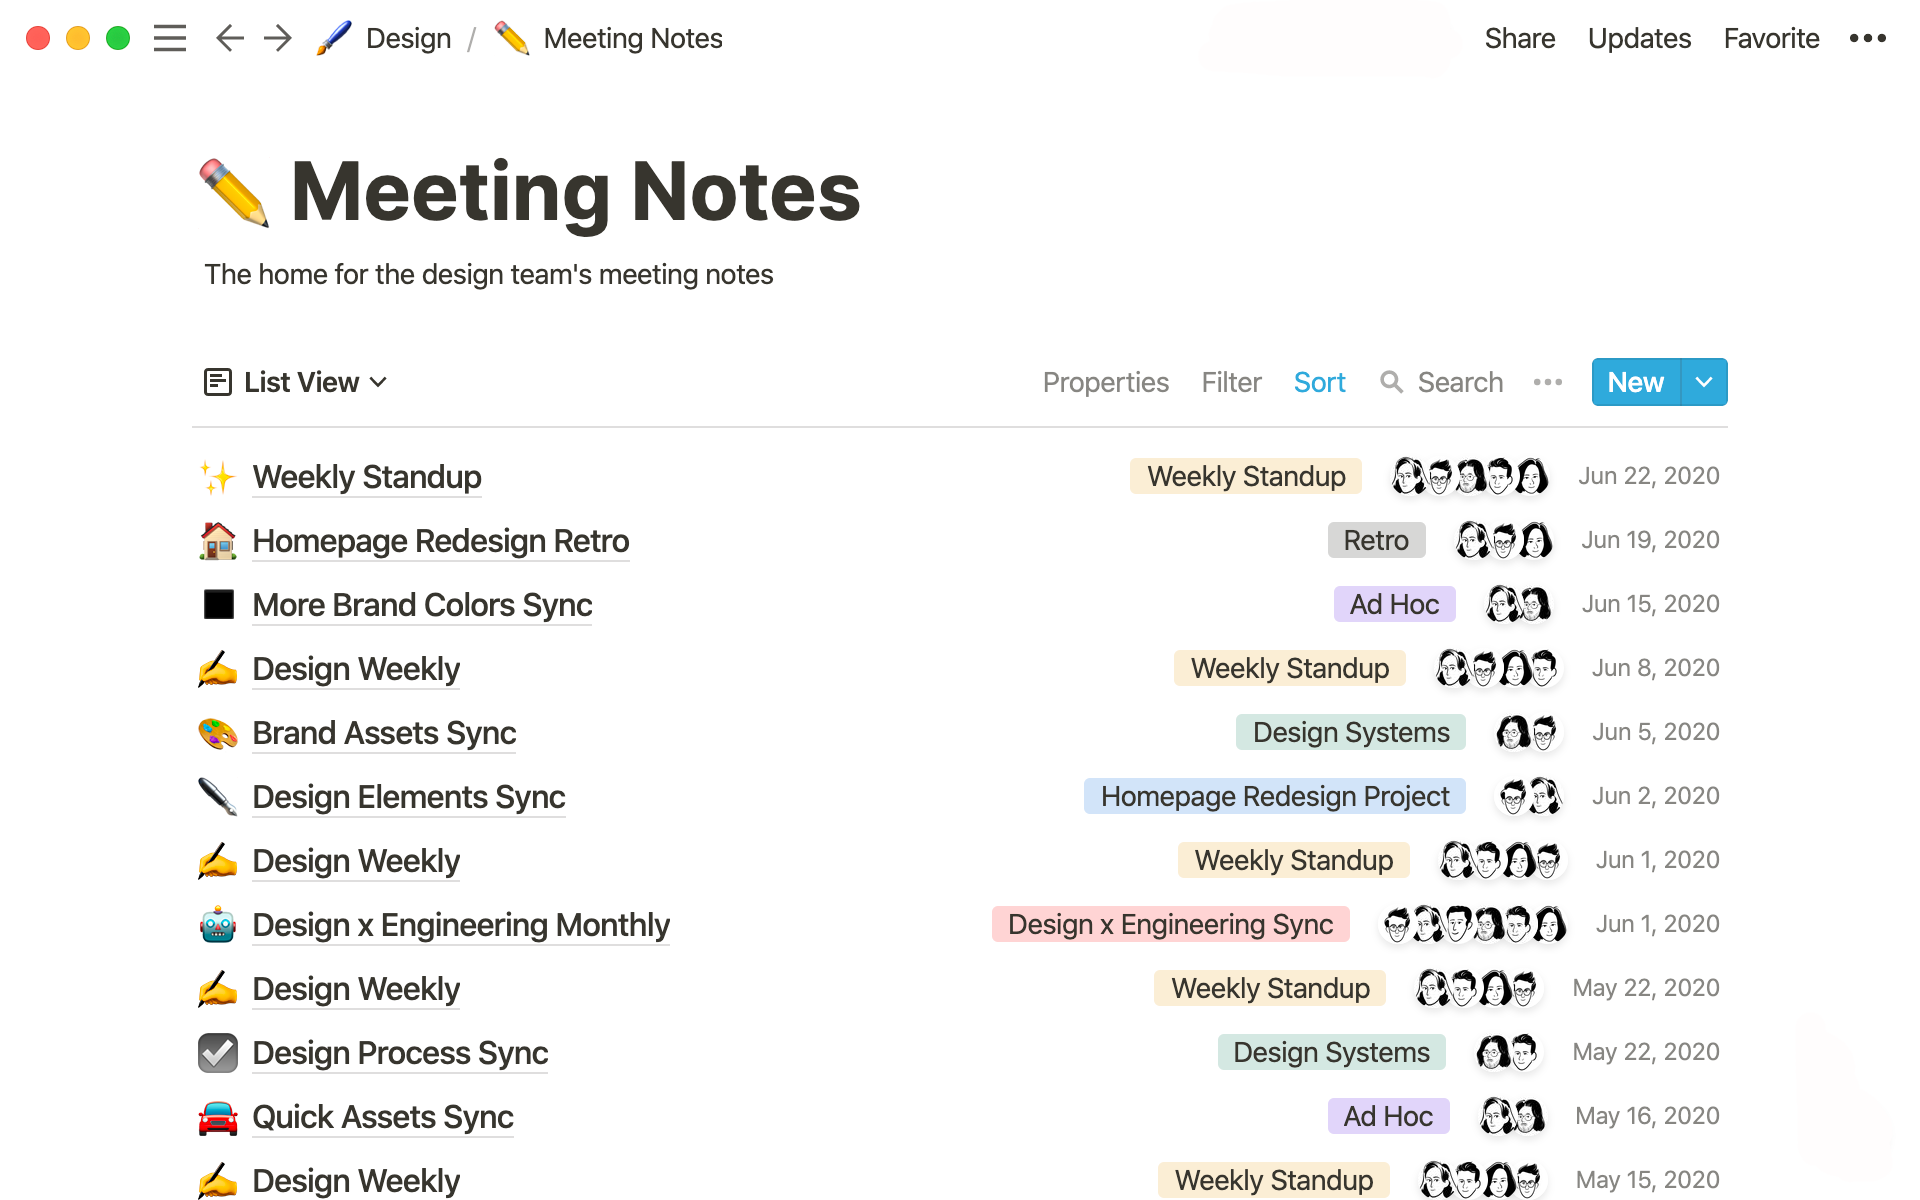 One place for all your design team’s meeting notes.